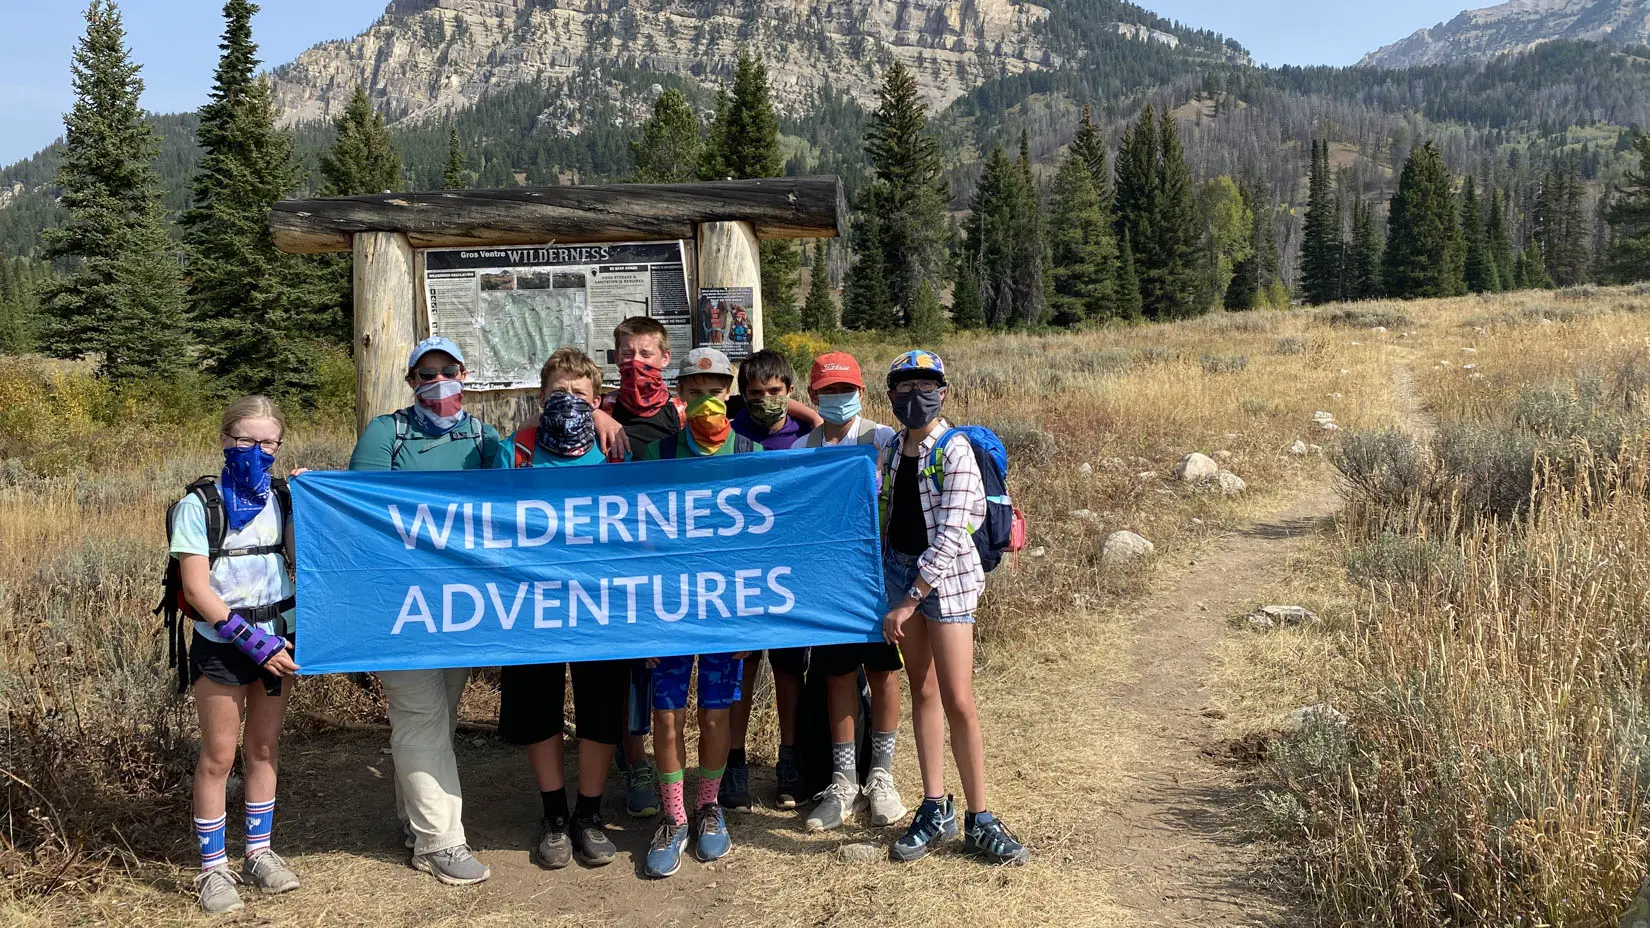 Travel group wearing masks holding a Wilderness Adventures sign